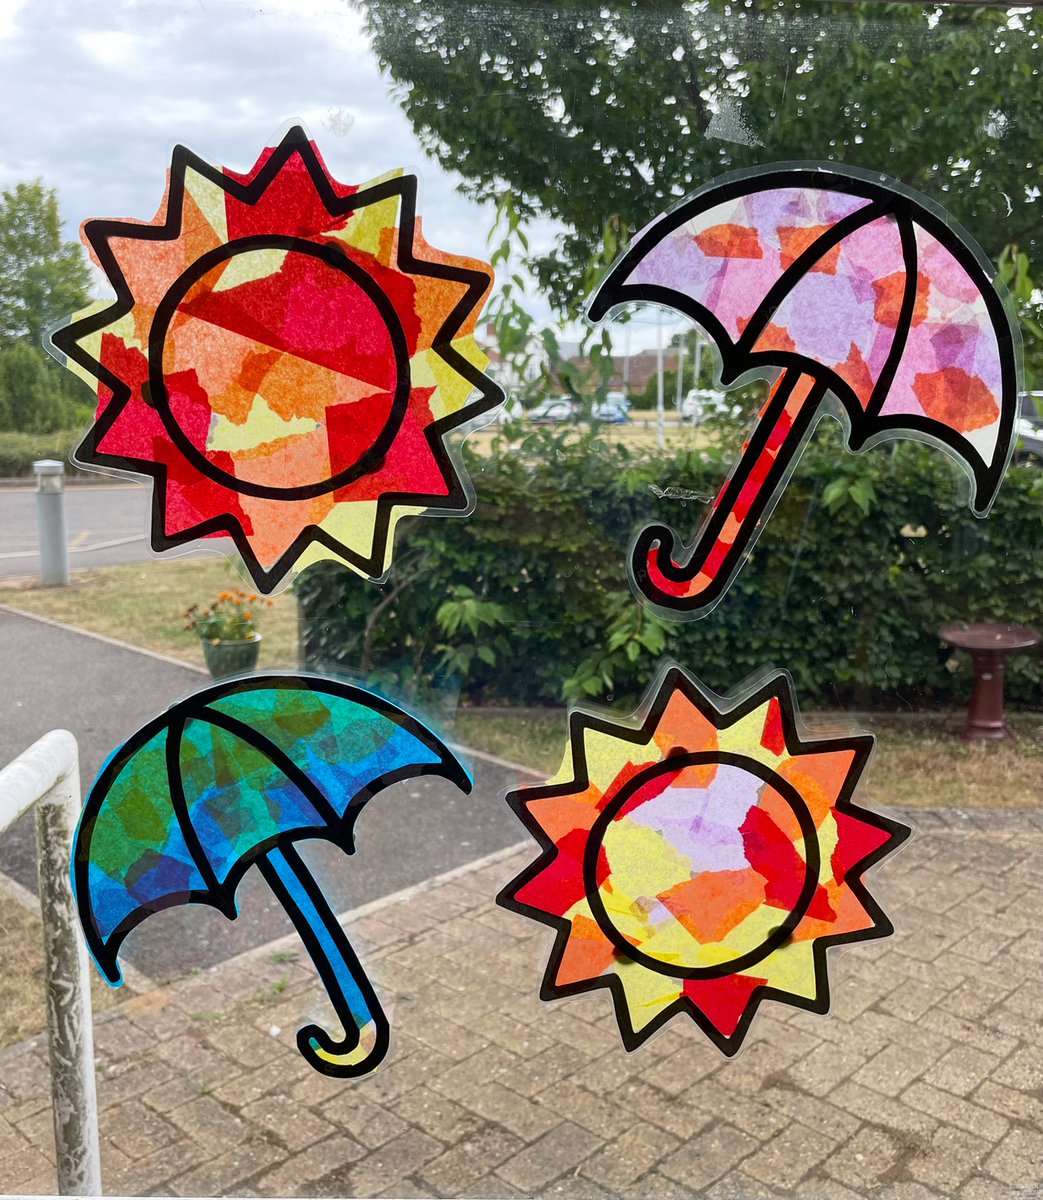 Today we celebrated St. Swithen’s Day with a fun, crafty activity whilst we reminisced about our favourite summer holidays. Let’s hope the bright colours secure our 40 days of sunshine!☀️ This activity is super easy, enjoyable and adaptable! @LPT_Activities @LPTnhs #summer #NHS